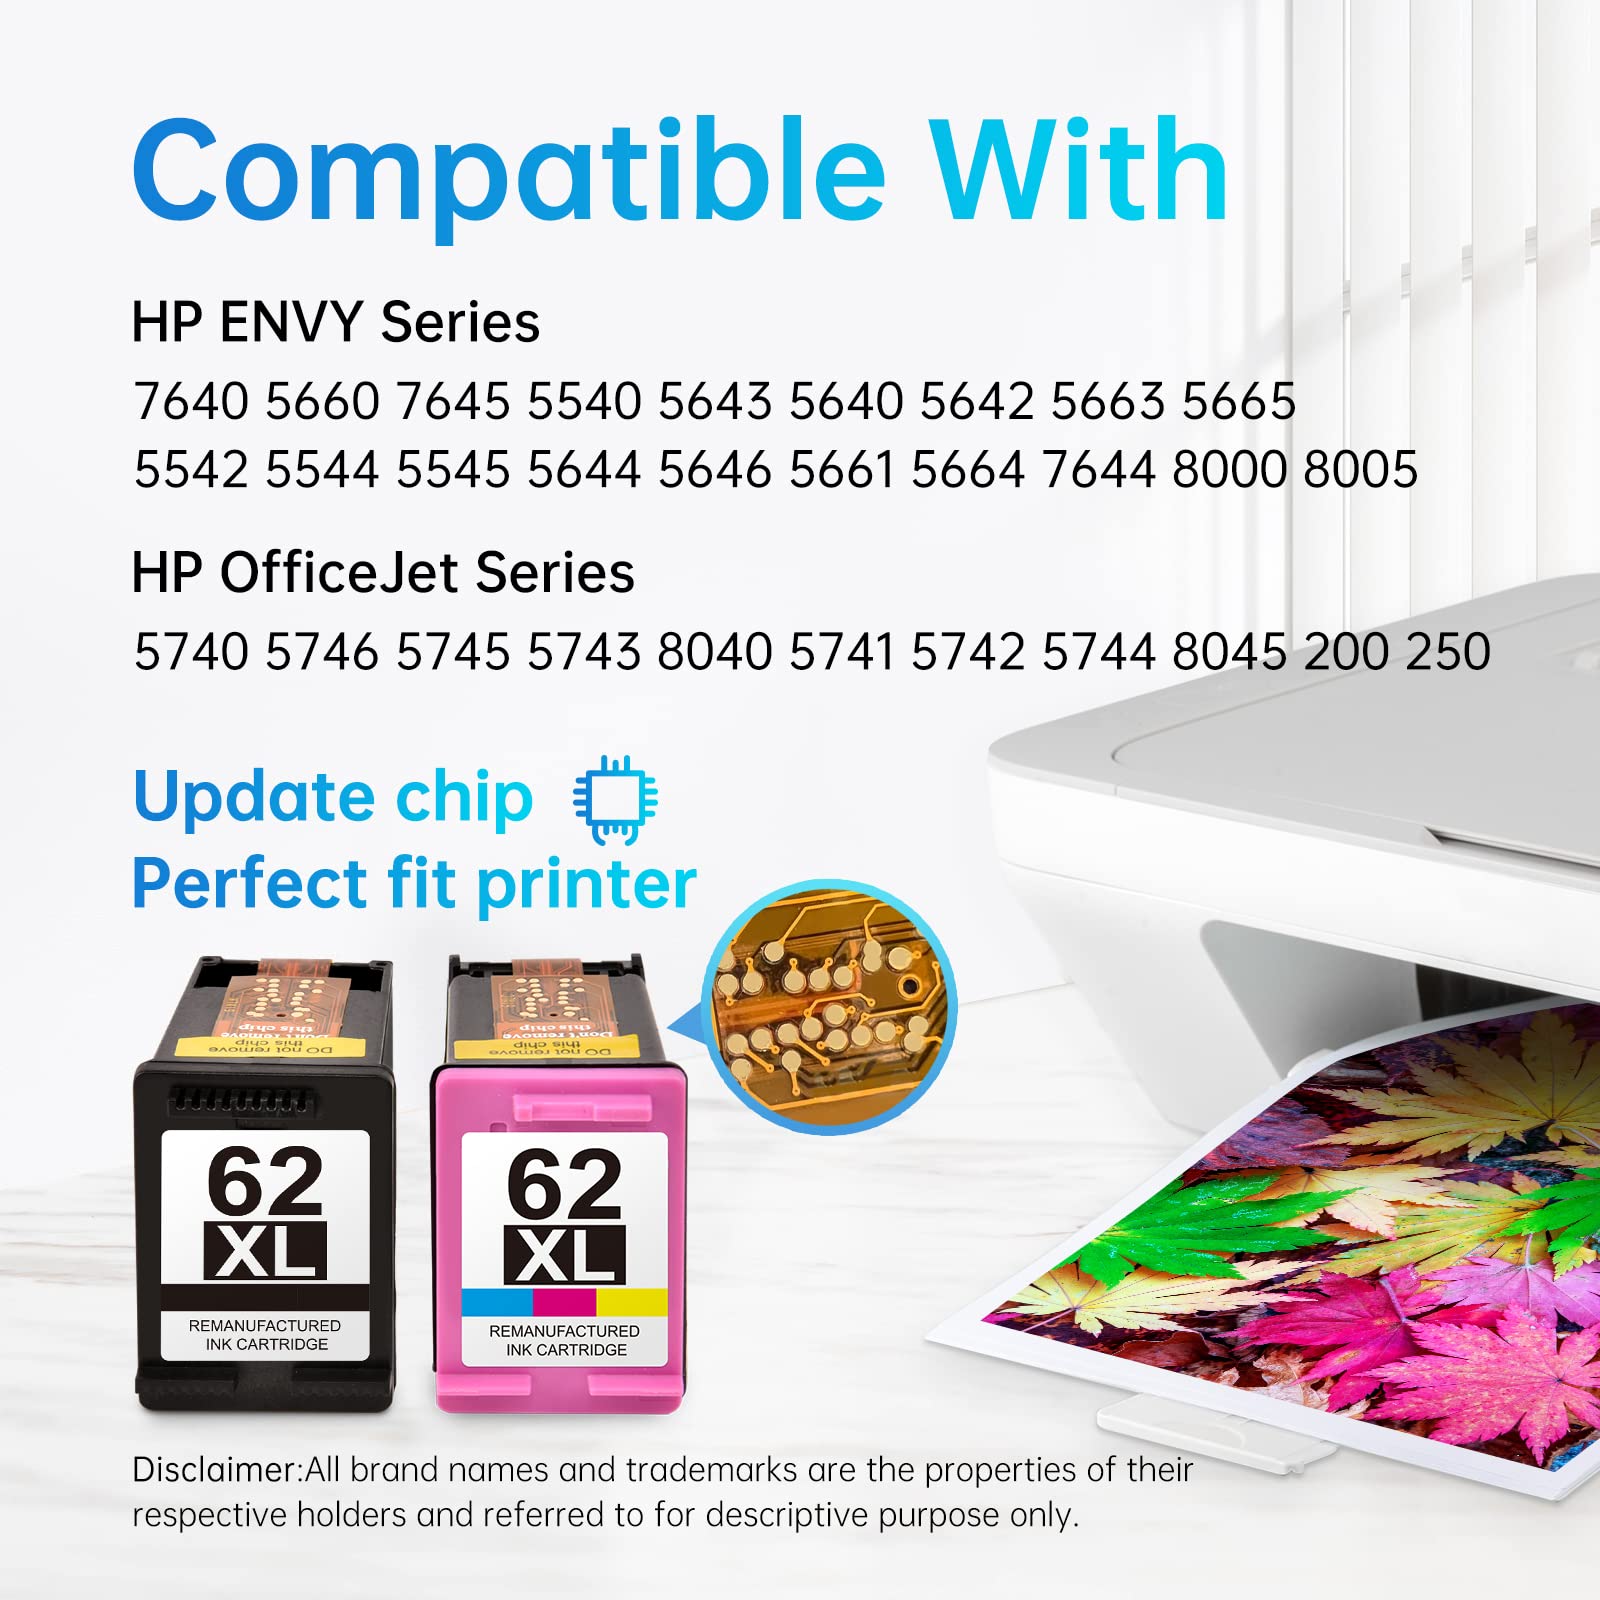 Printer Compatibility List for HP 62XL Ink Cartridge Combo Pack:HP 62XL ink cartridges showing a wide range of compatible HP ENVY and OfficeJet printer models, emphasizing the updated chip technology for a perfect printer fit